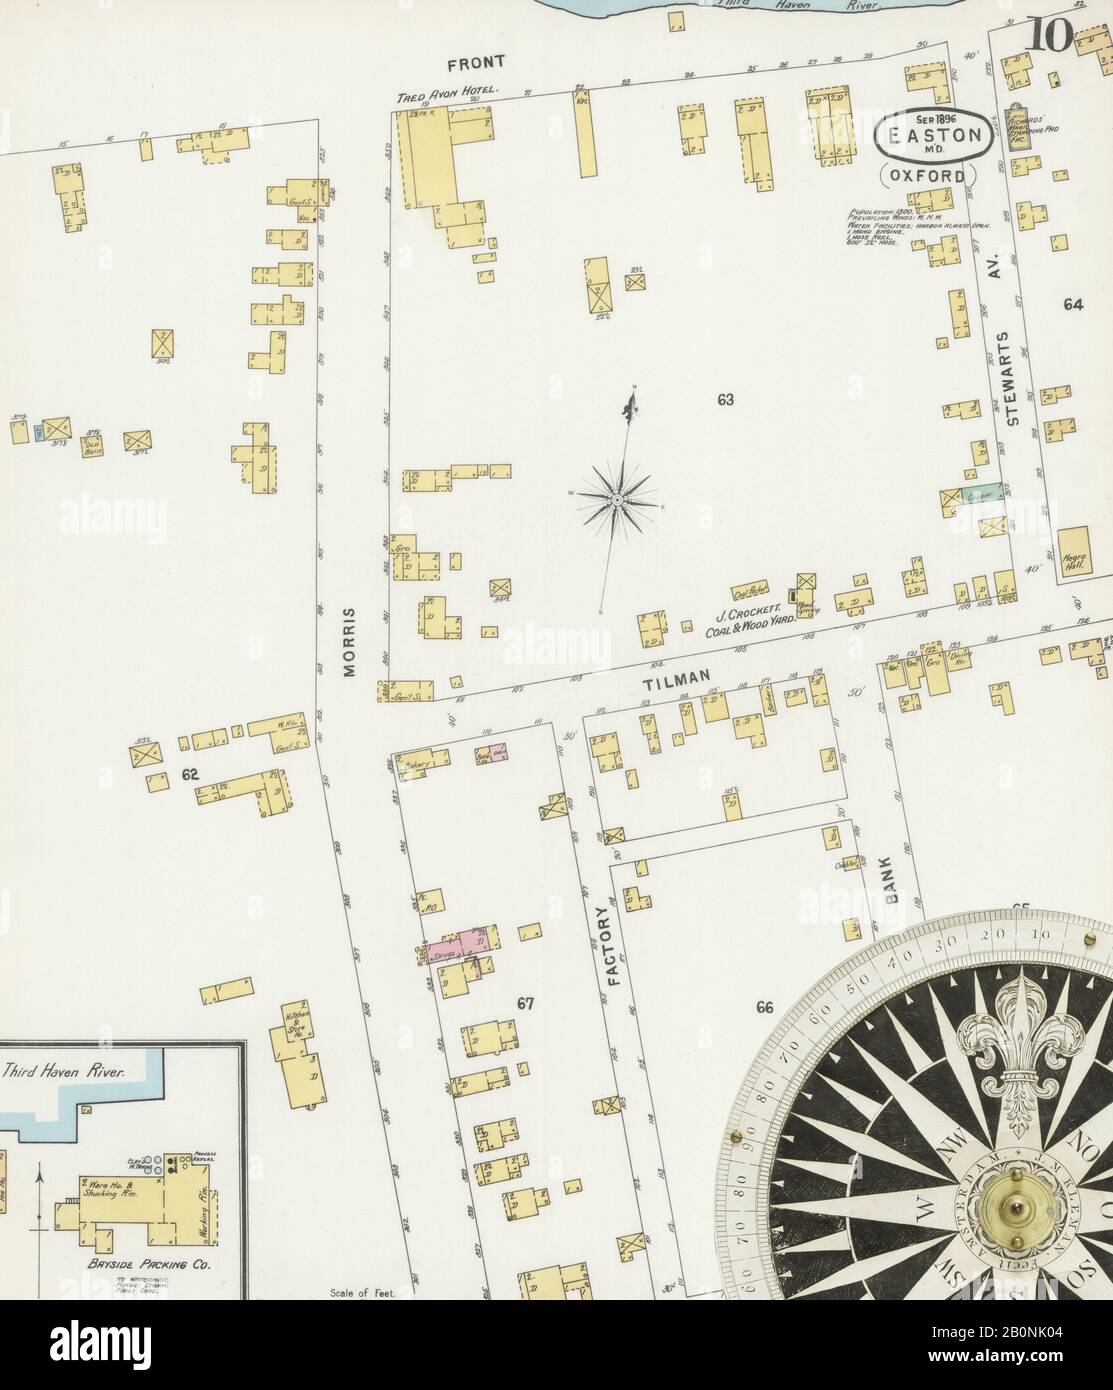 Image 10 of Sanborn Fire Insurance Map from Easton, Talbot County, Maryland. Sep 1896. 13 Sheet(s). Includes Saint Michaels, Oxford, Trappe, America, street map with a Nineteenth Century compass Stock Photo